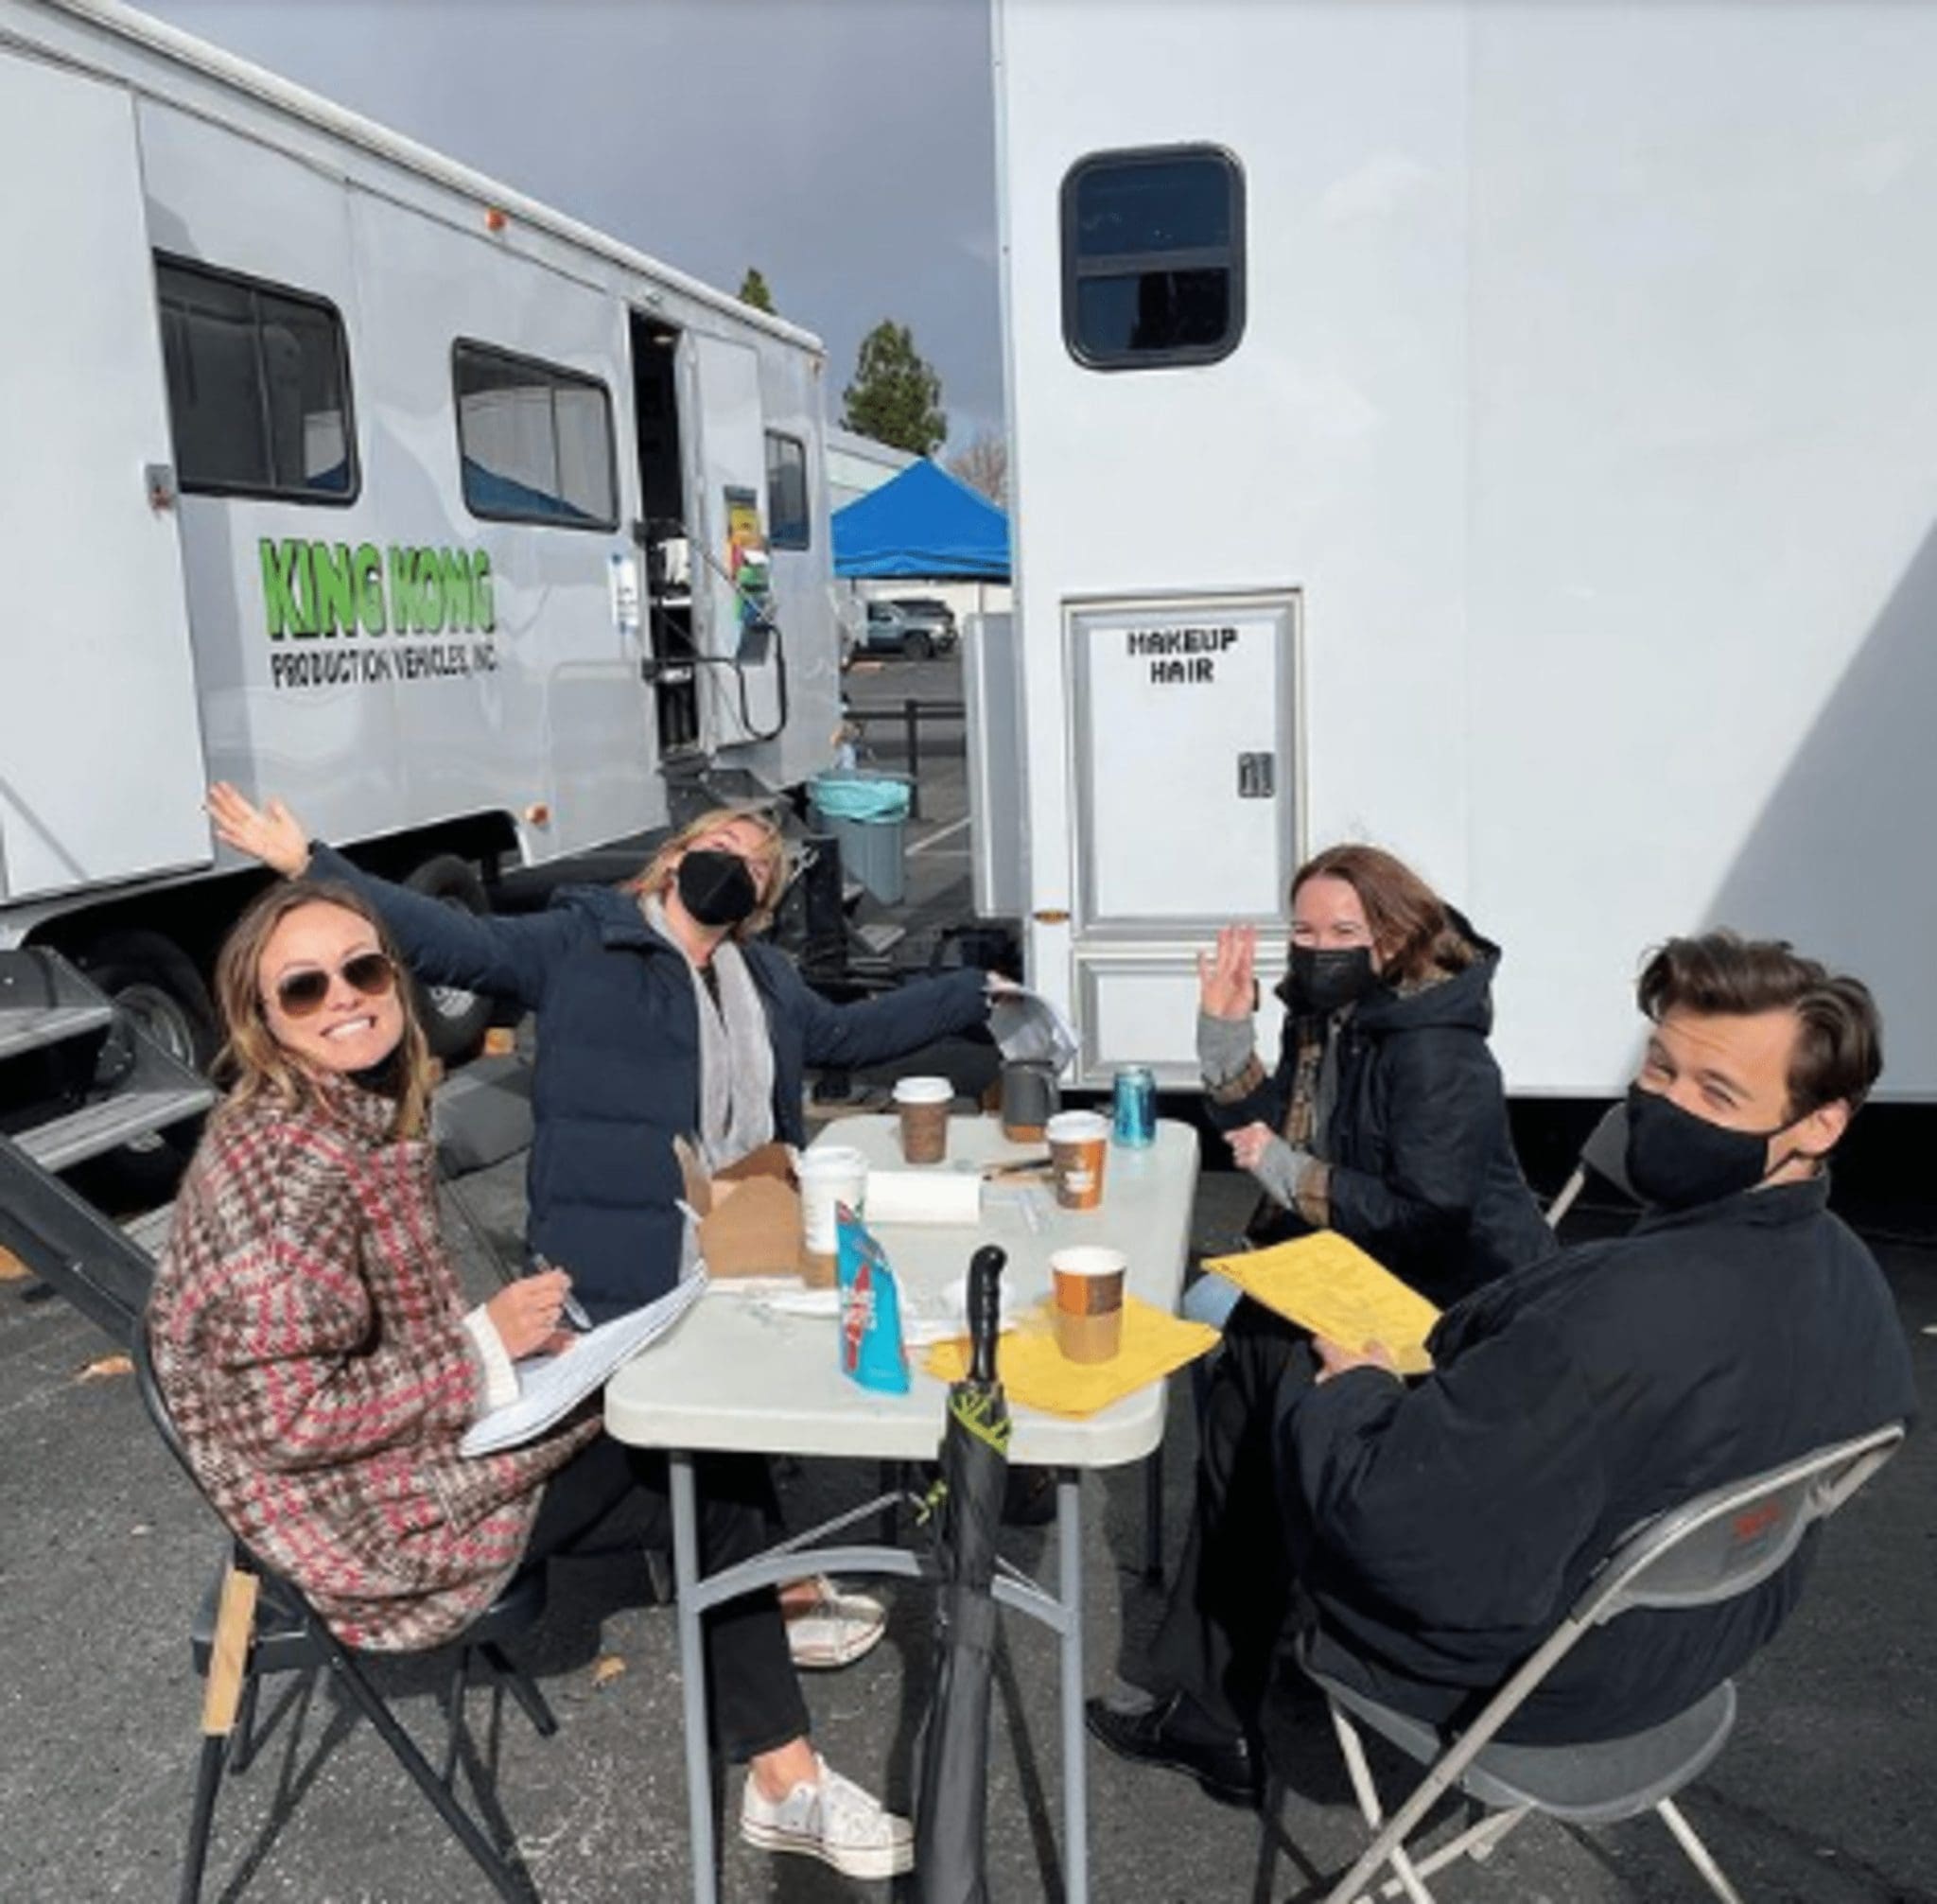 During The Filming Of "Don't Worry Darling," Olivia Wilde, Florence Pugh, And Harry Styles Posed For A Photo Together